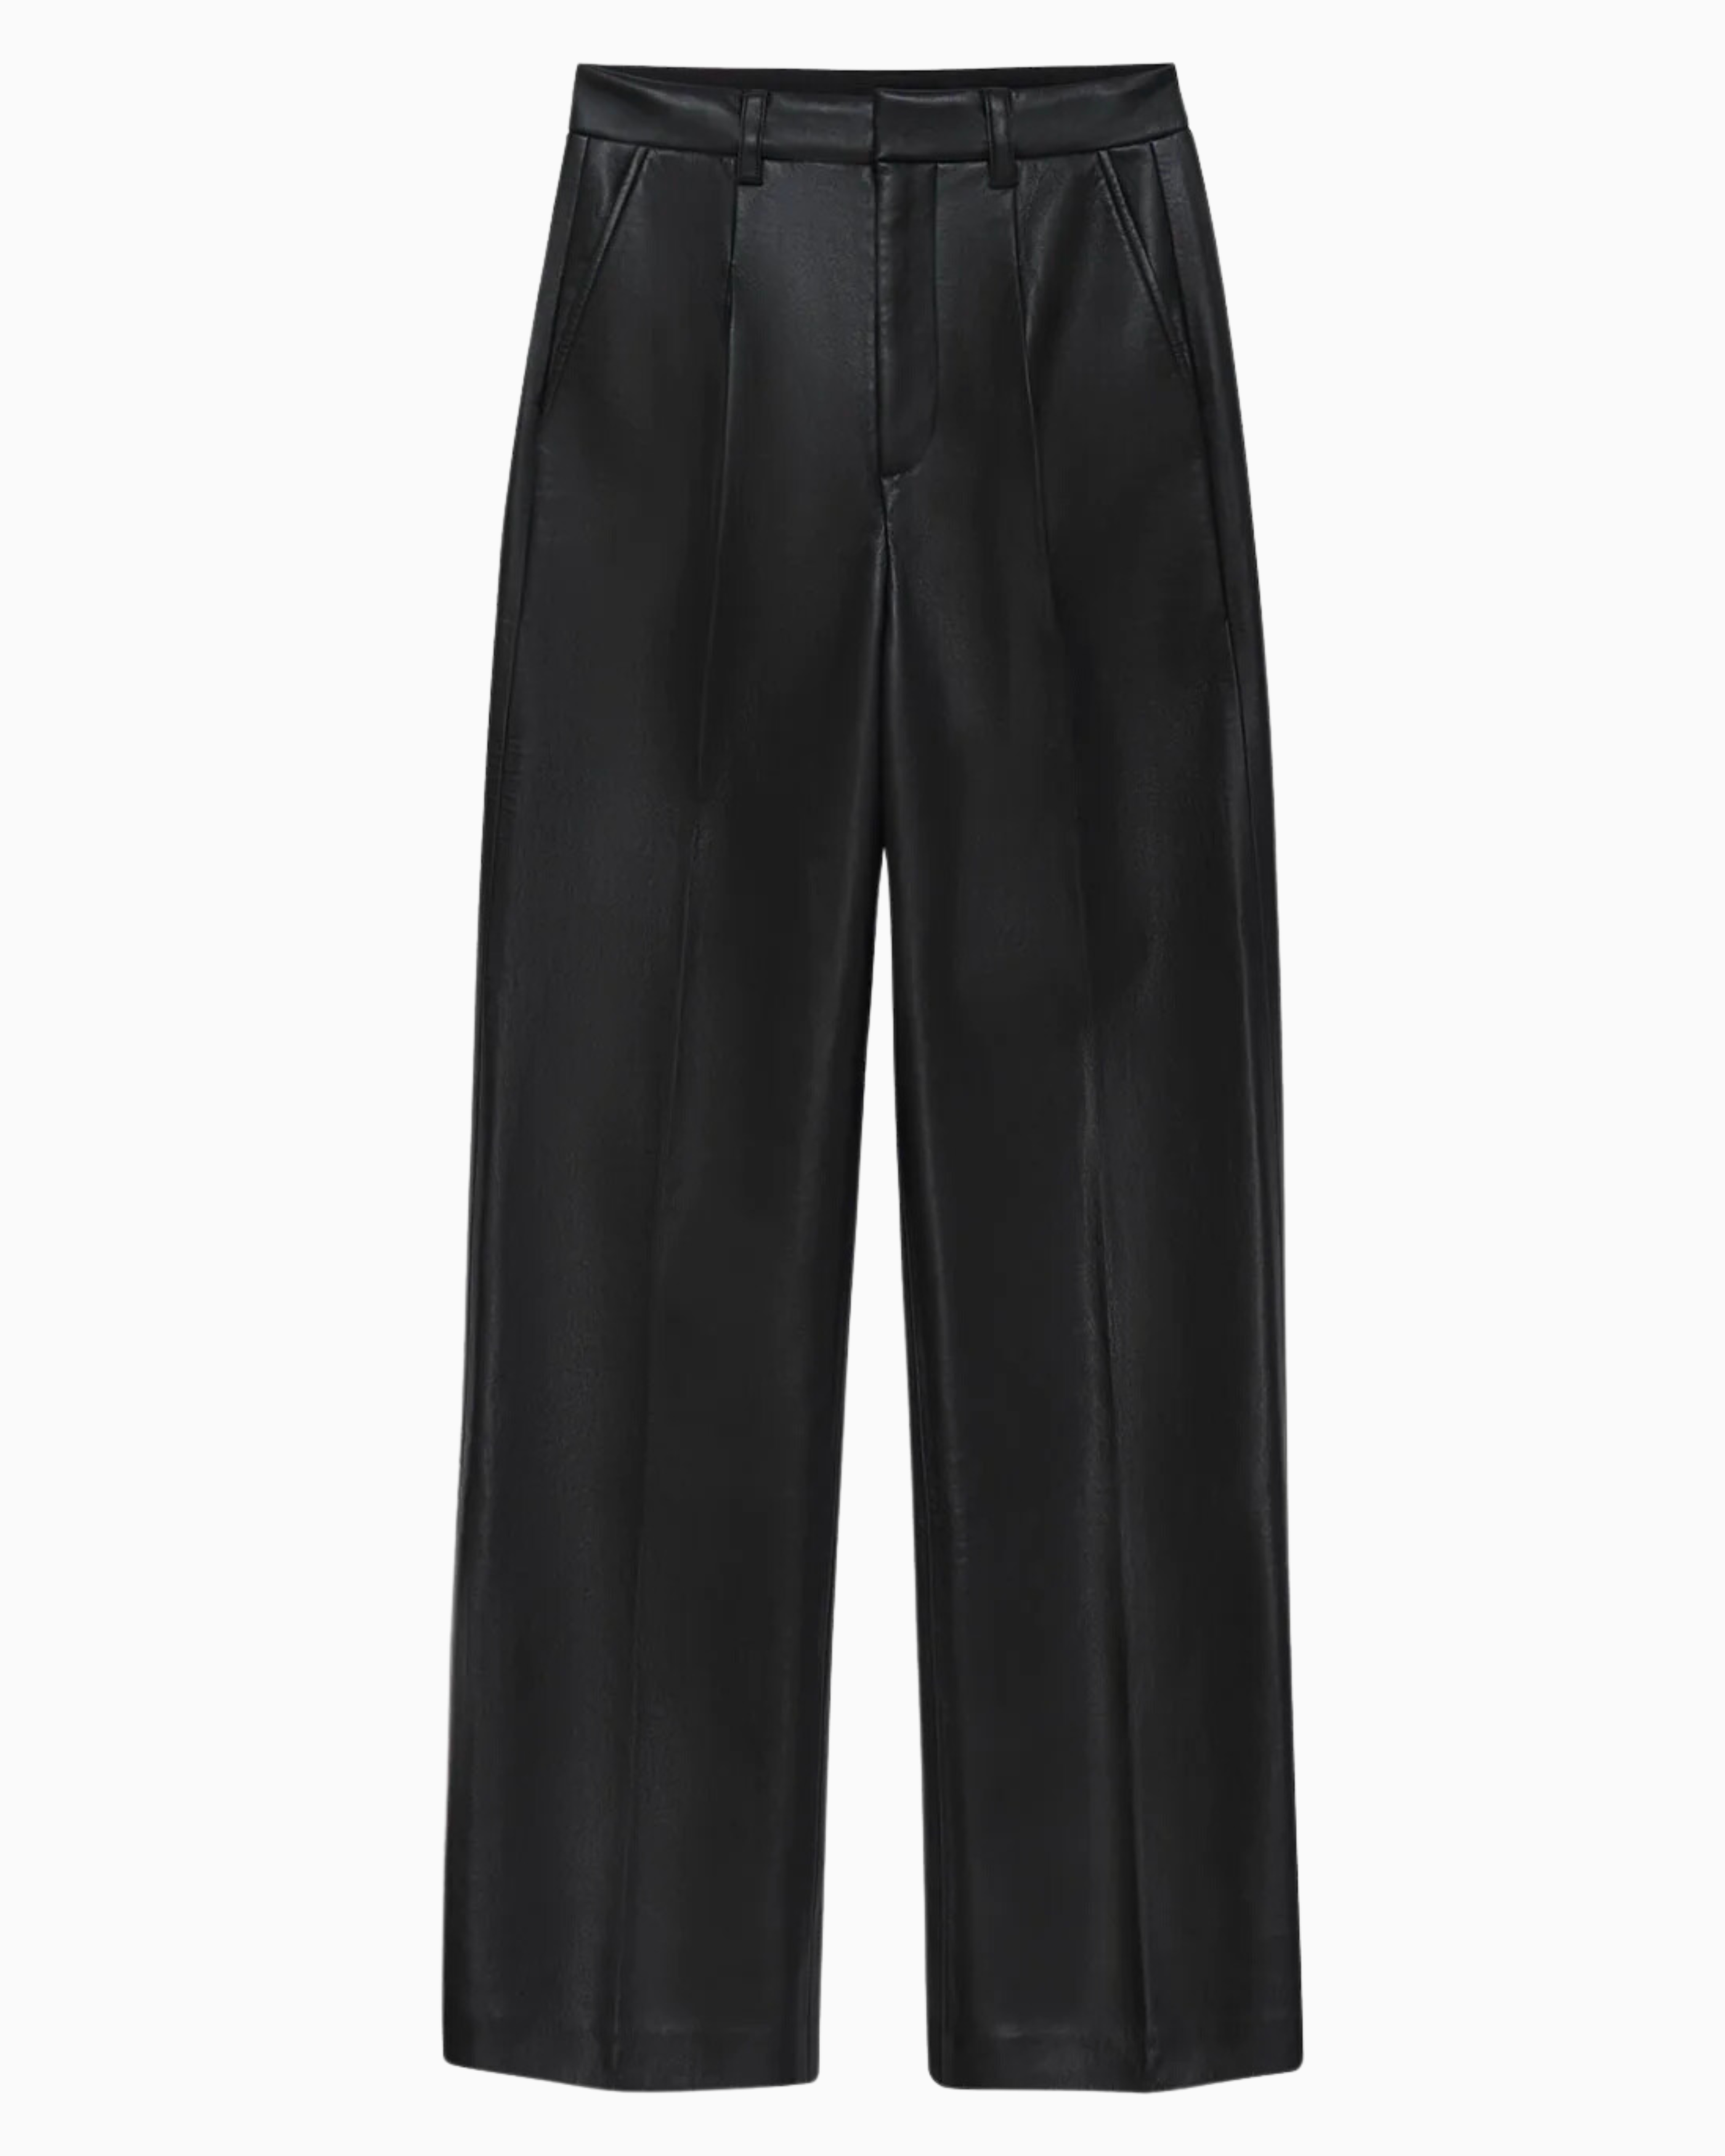 Anine Bing Carmen Pant in Black Recycled Leather